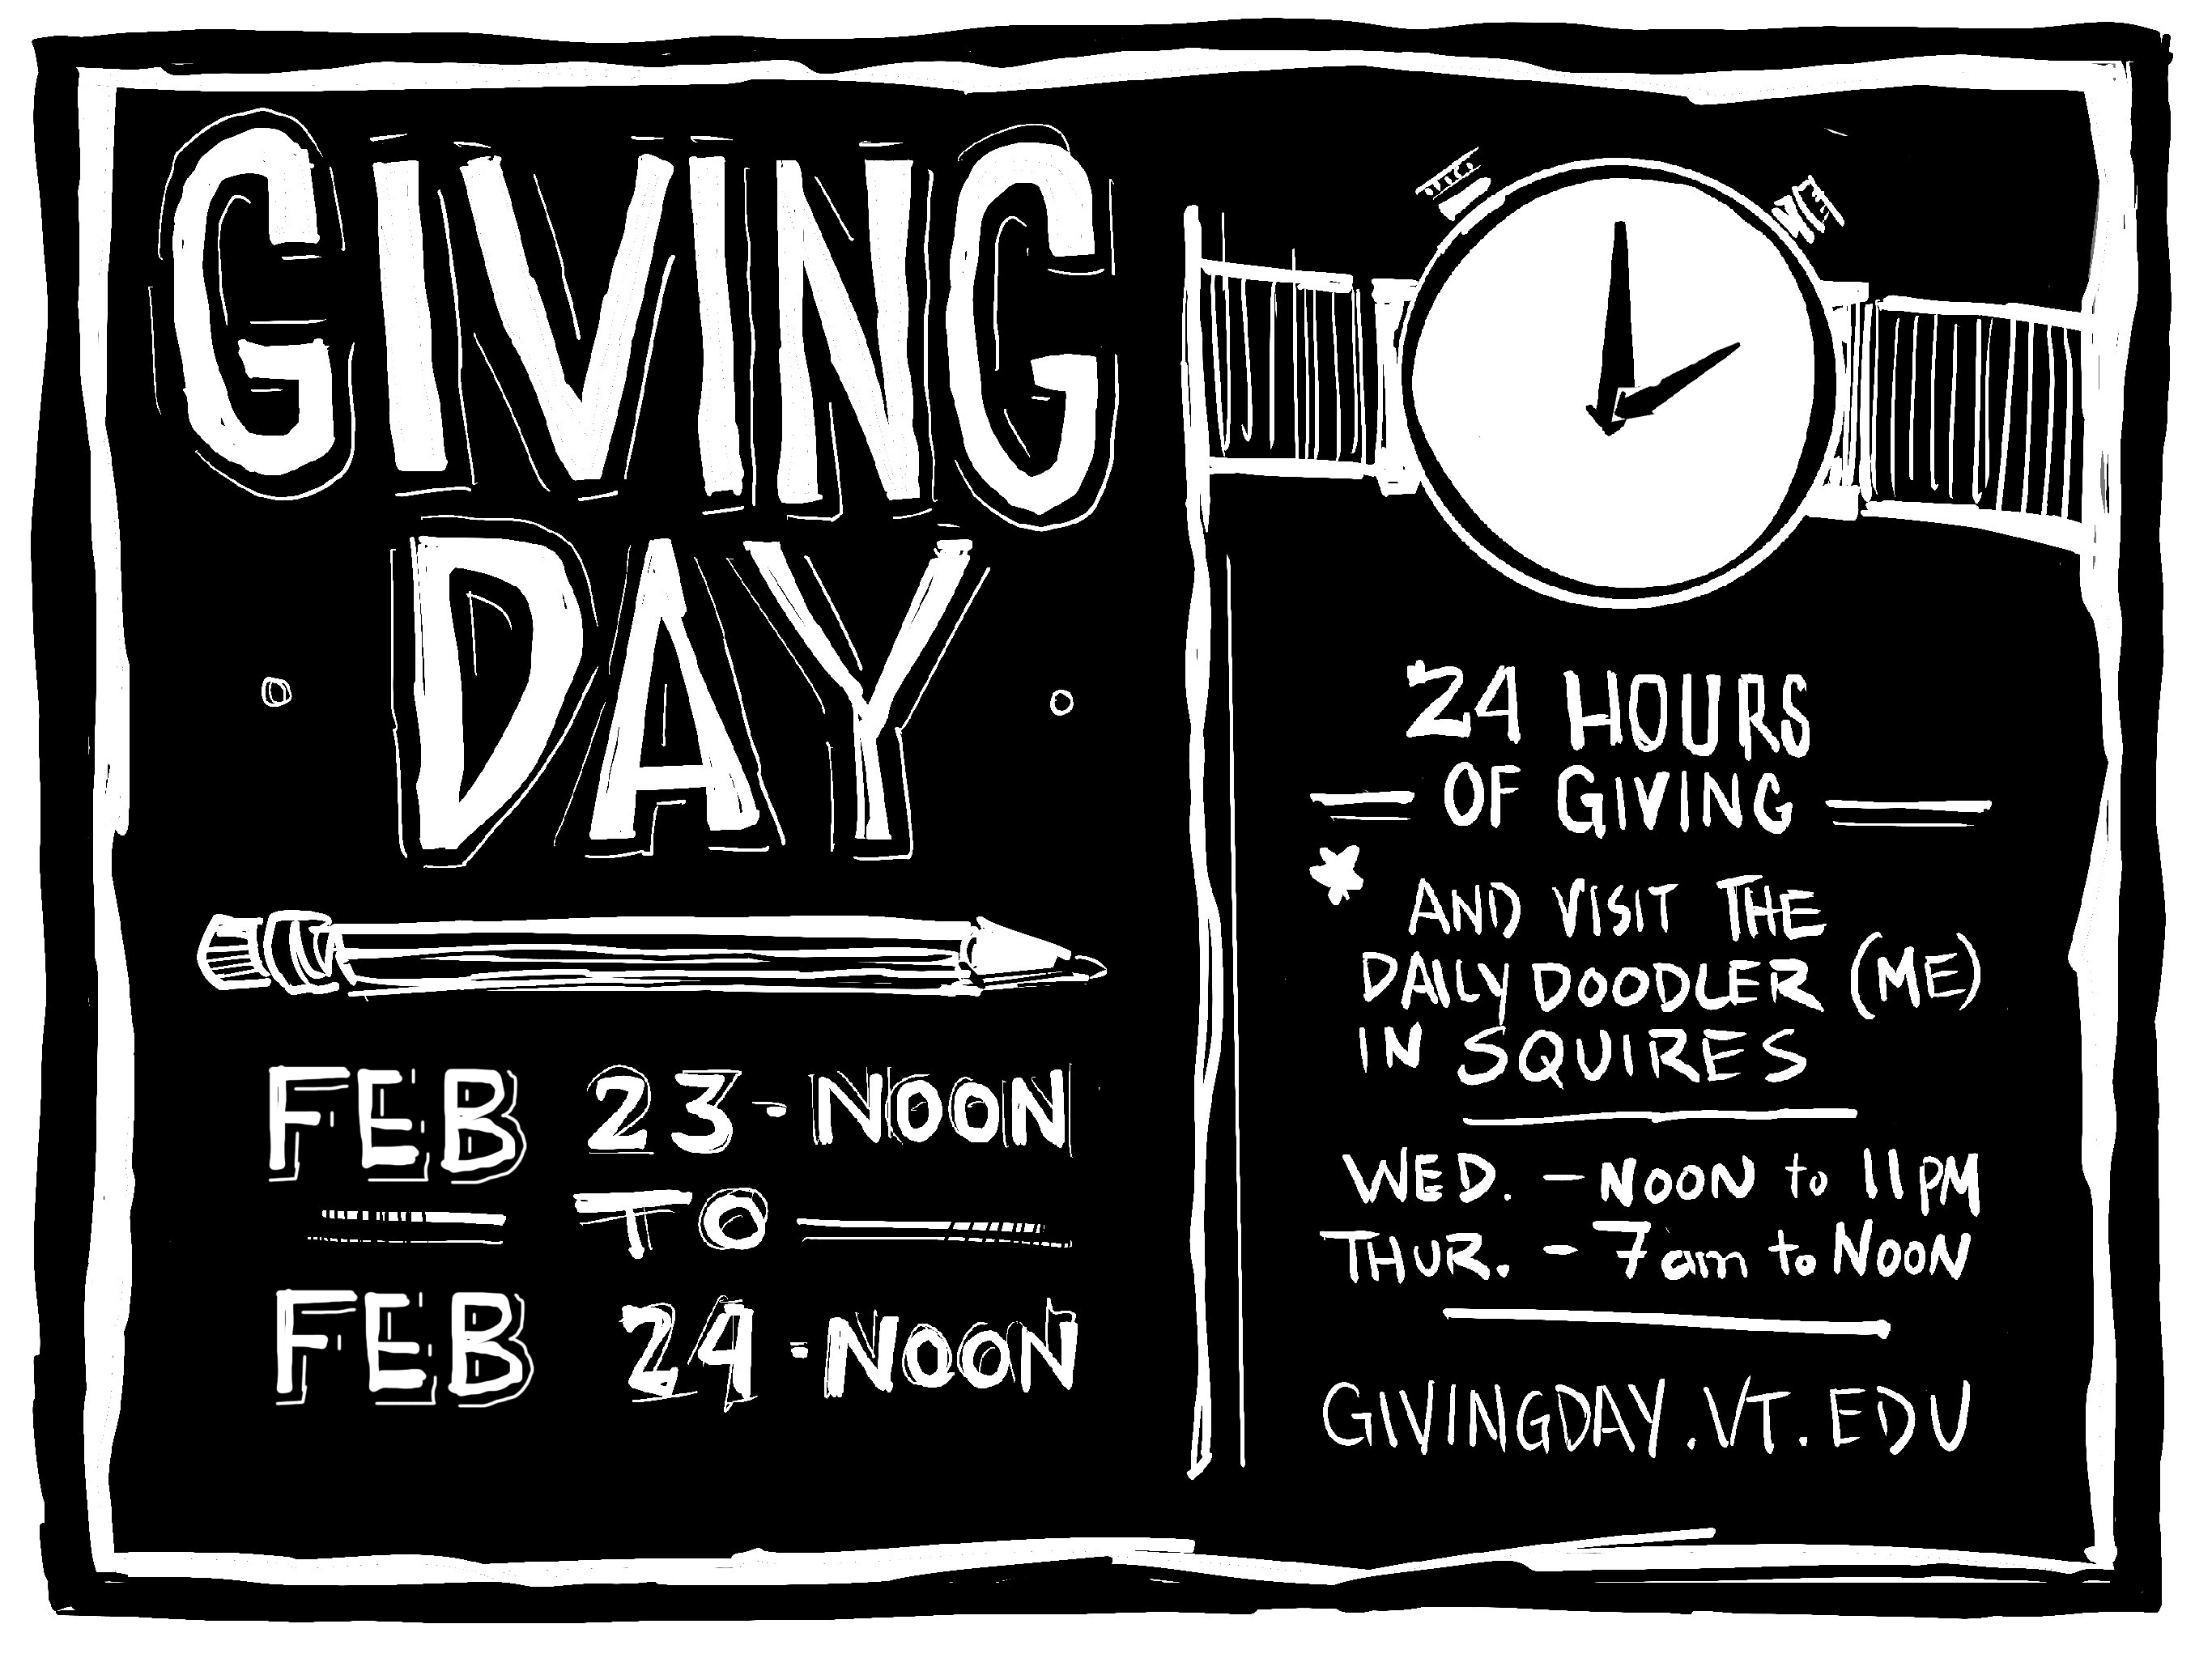 Promotion skech for Giving Day